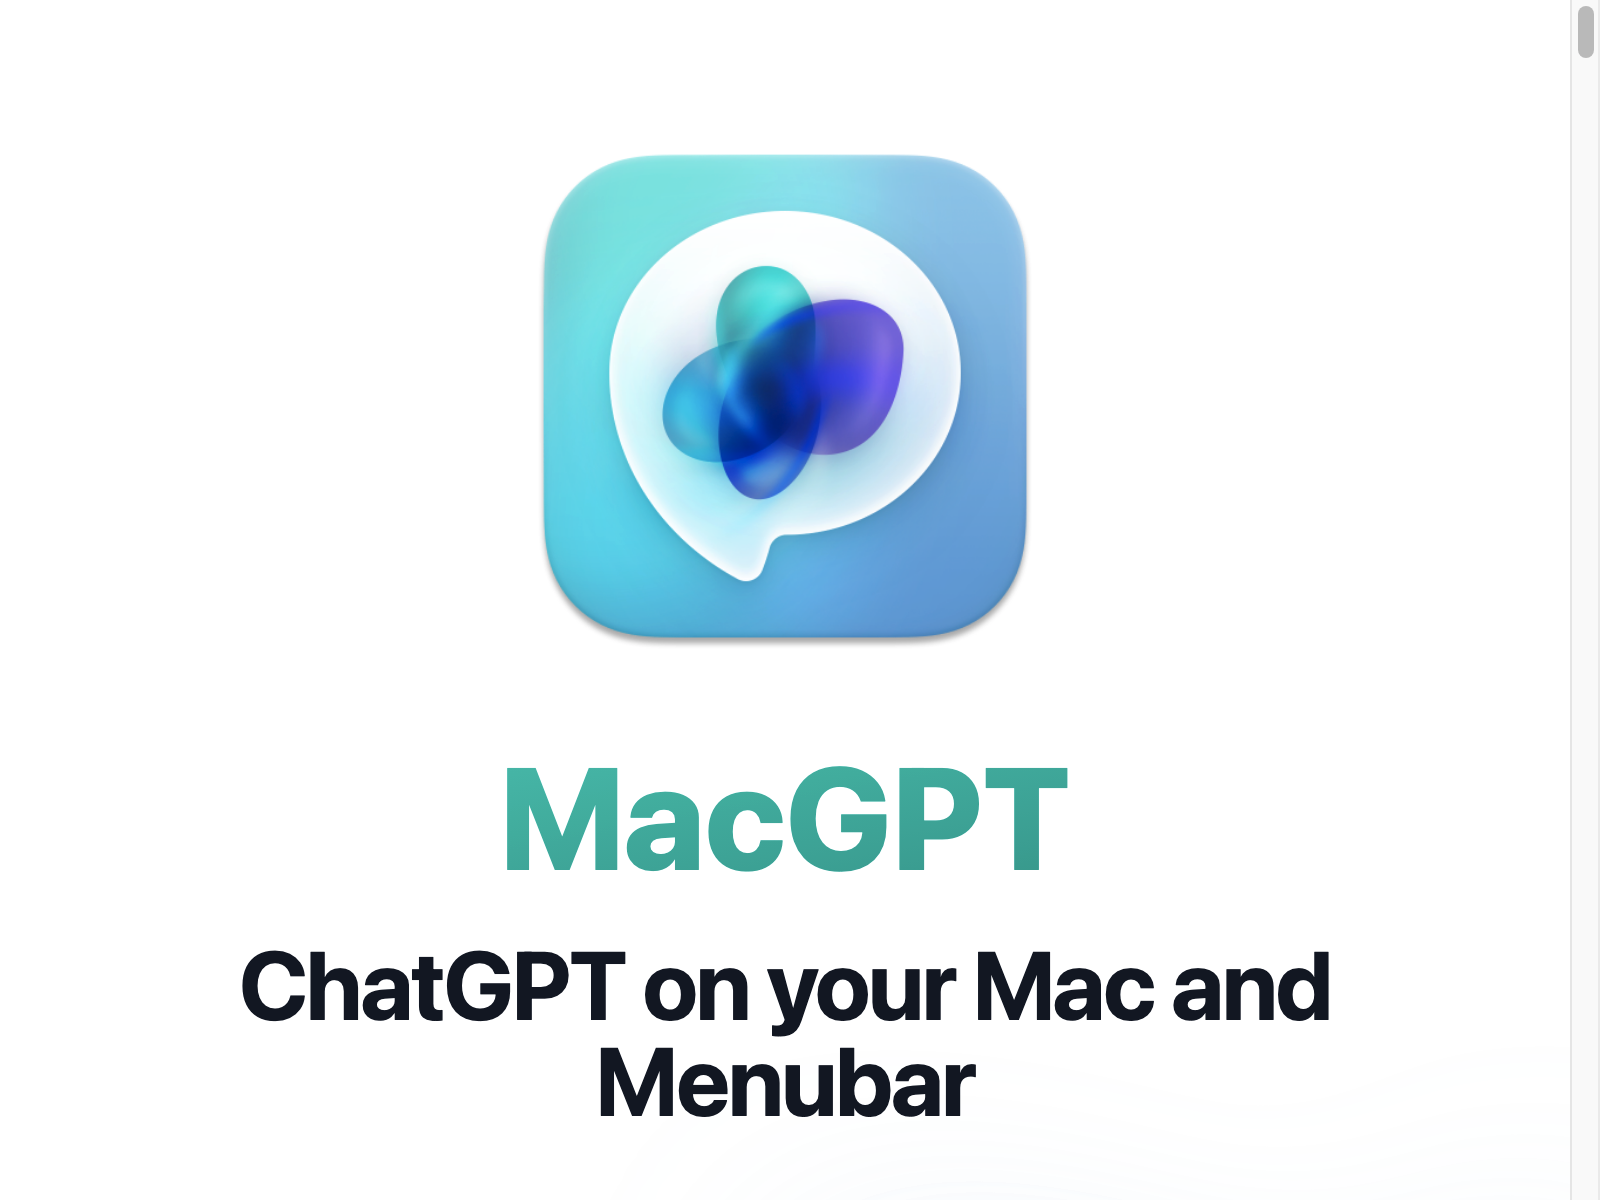 macgpt Review: Pros, Cons, Alternatives